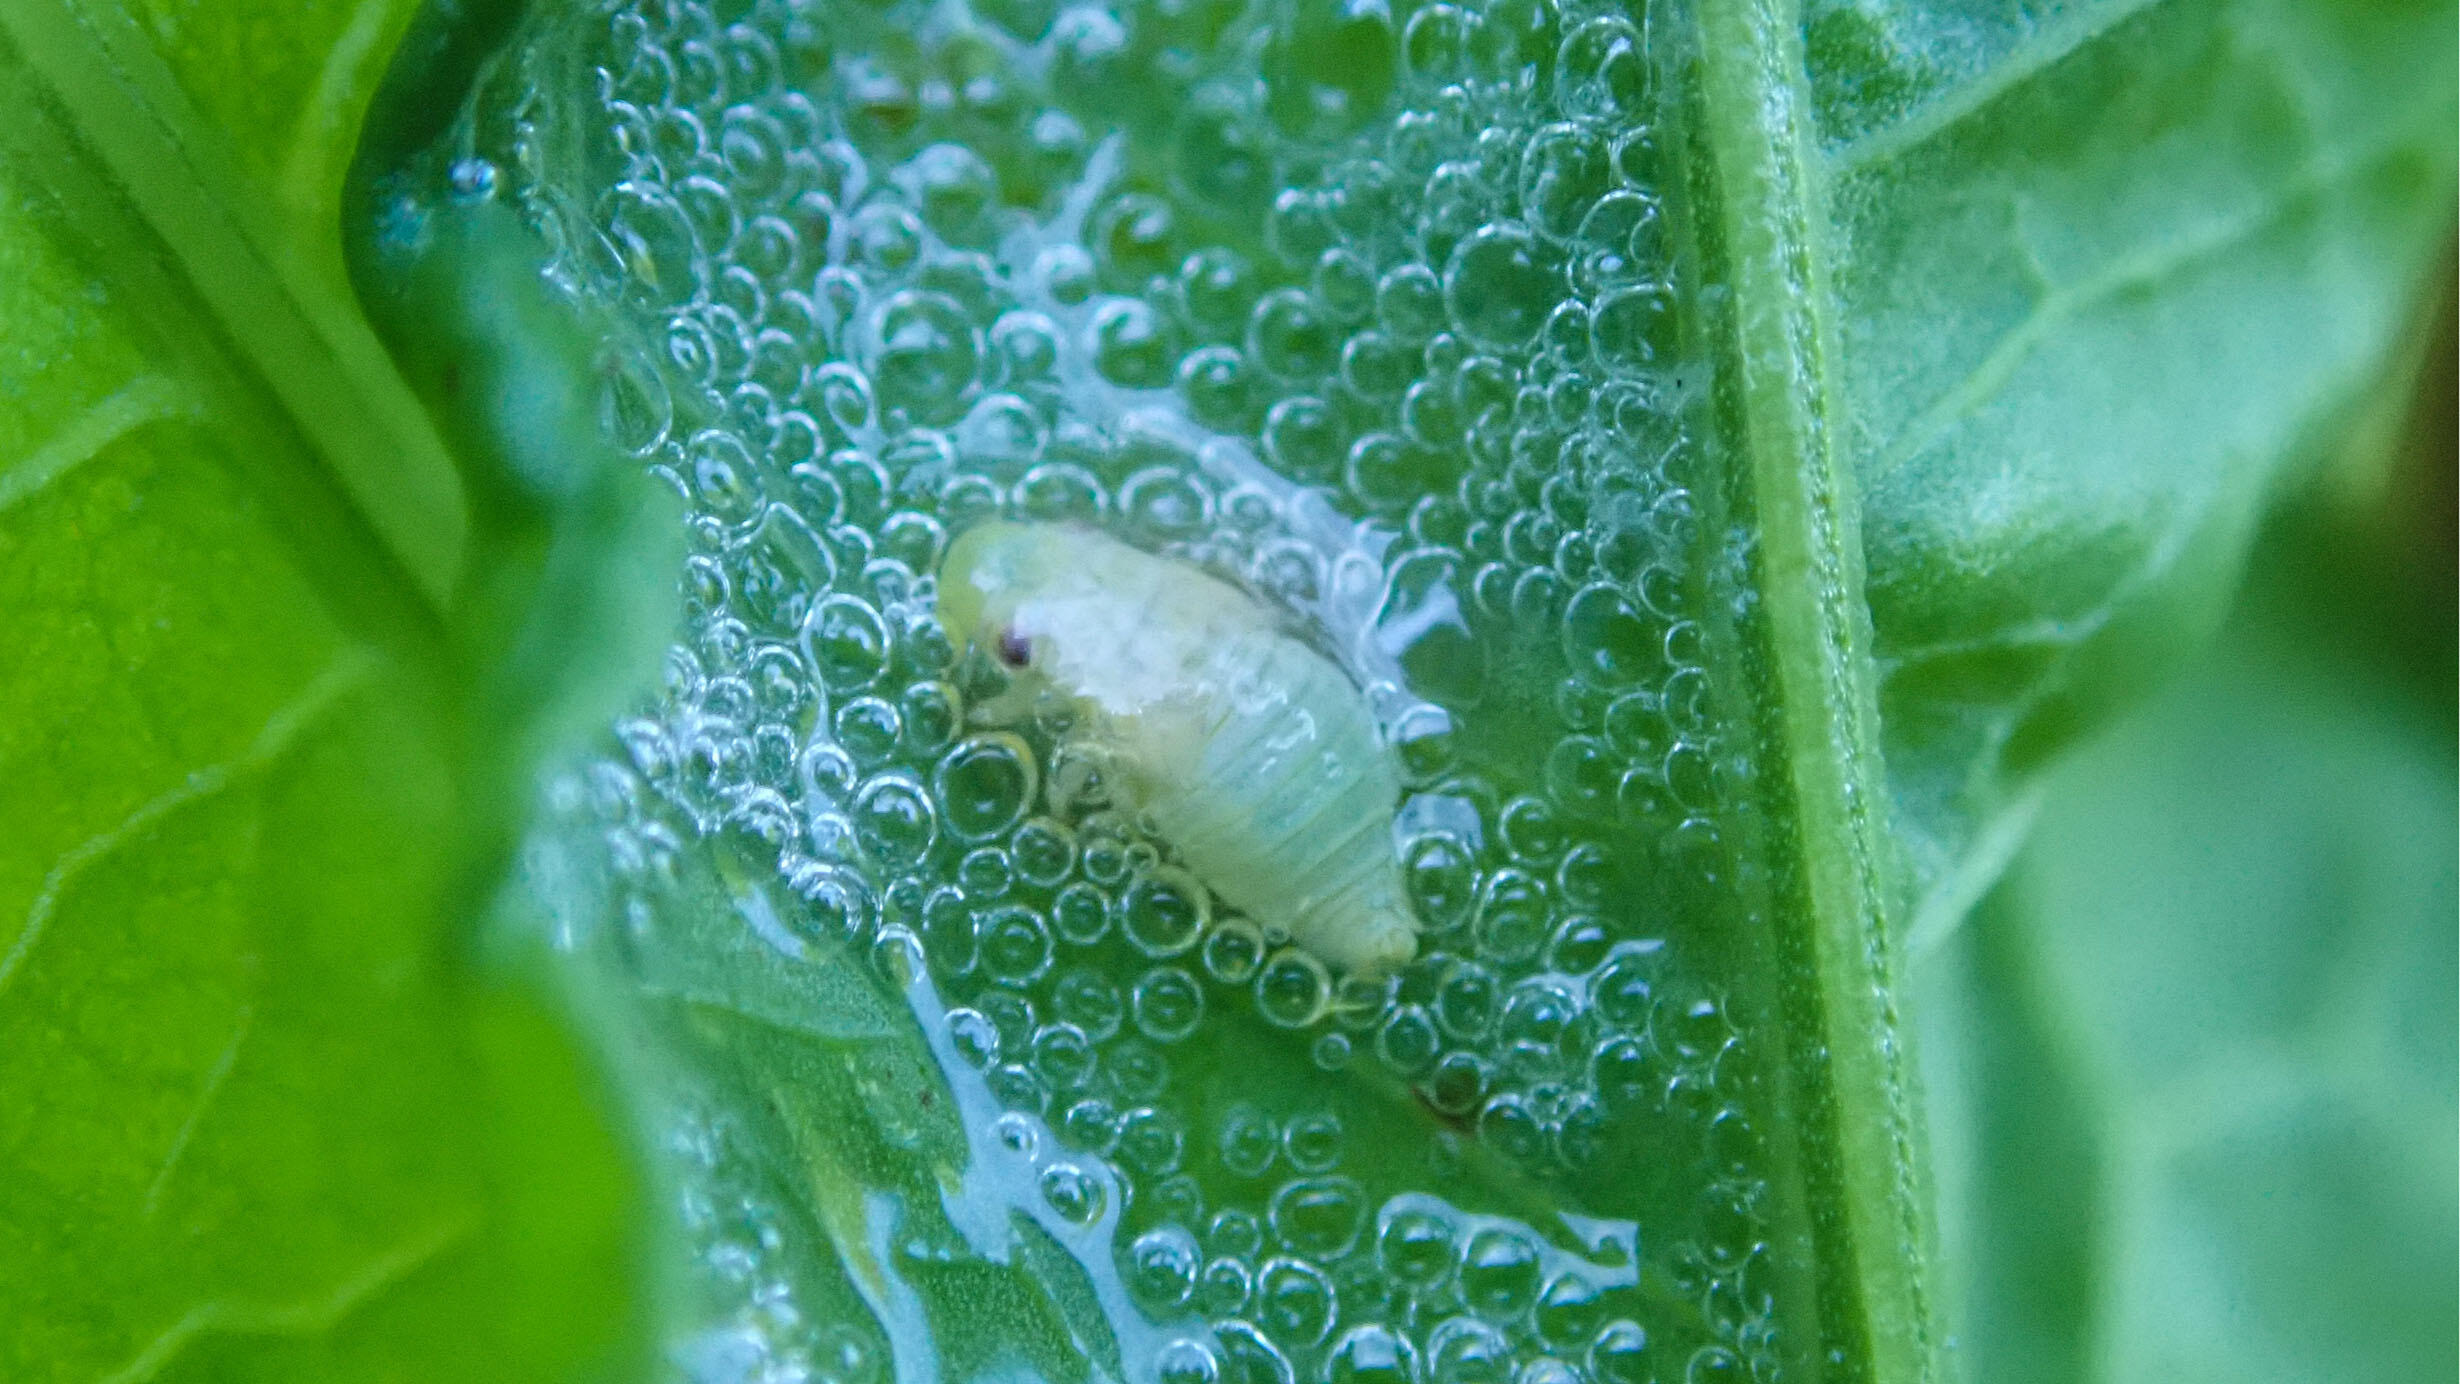 A pale, young meadow spittlebug on a leaf covered in a layer of bubbles which have been produced by the meadow spittlebug.